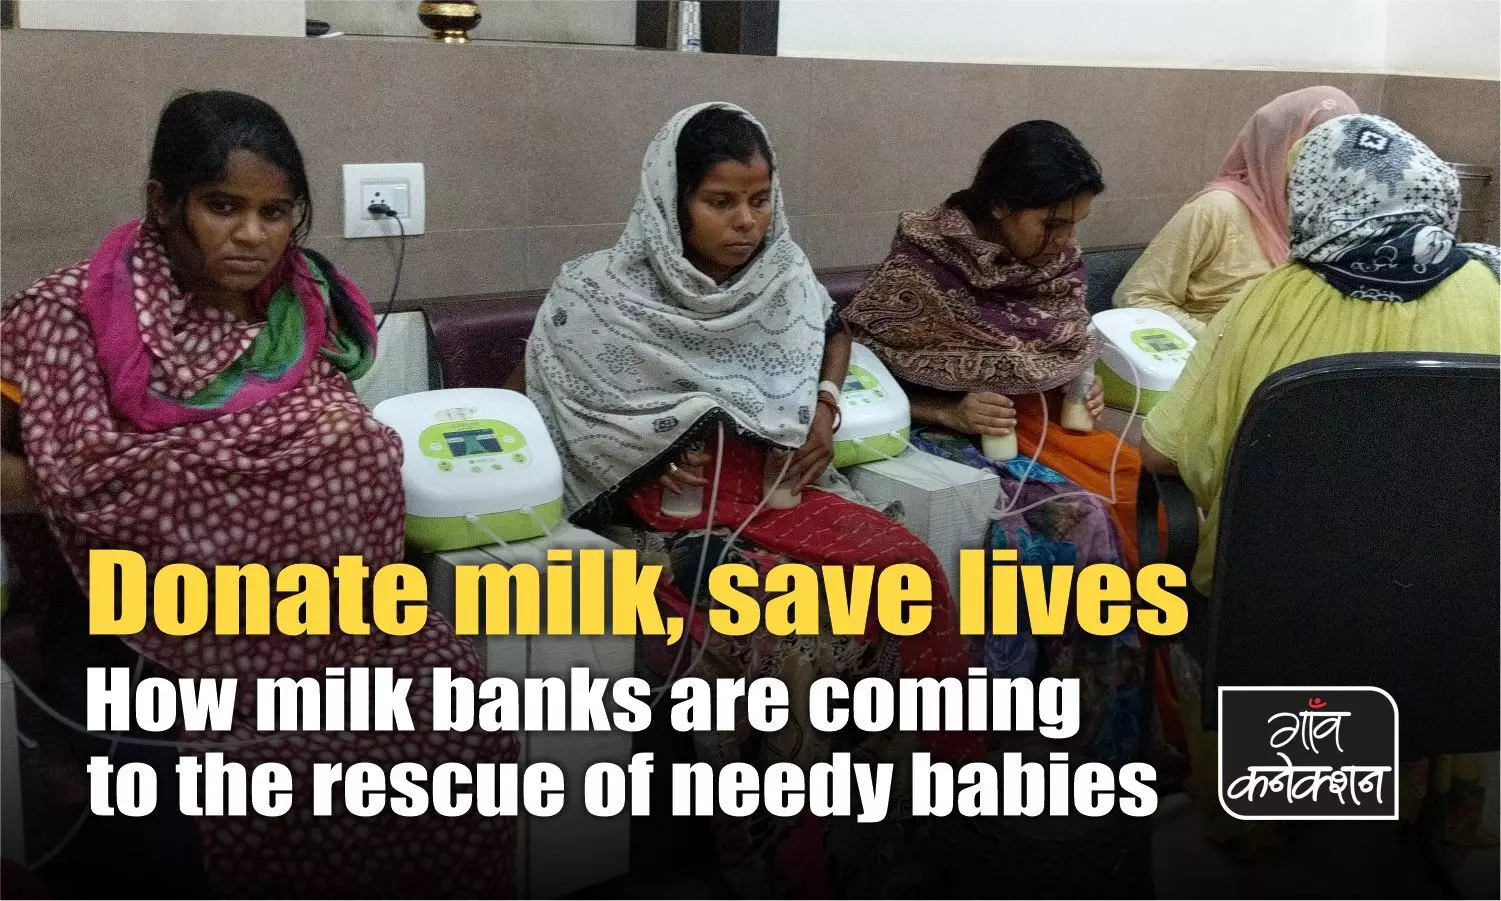 These mothers donate their milk to save the lives of other babies